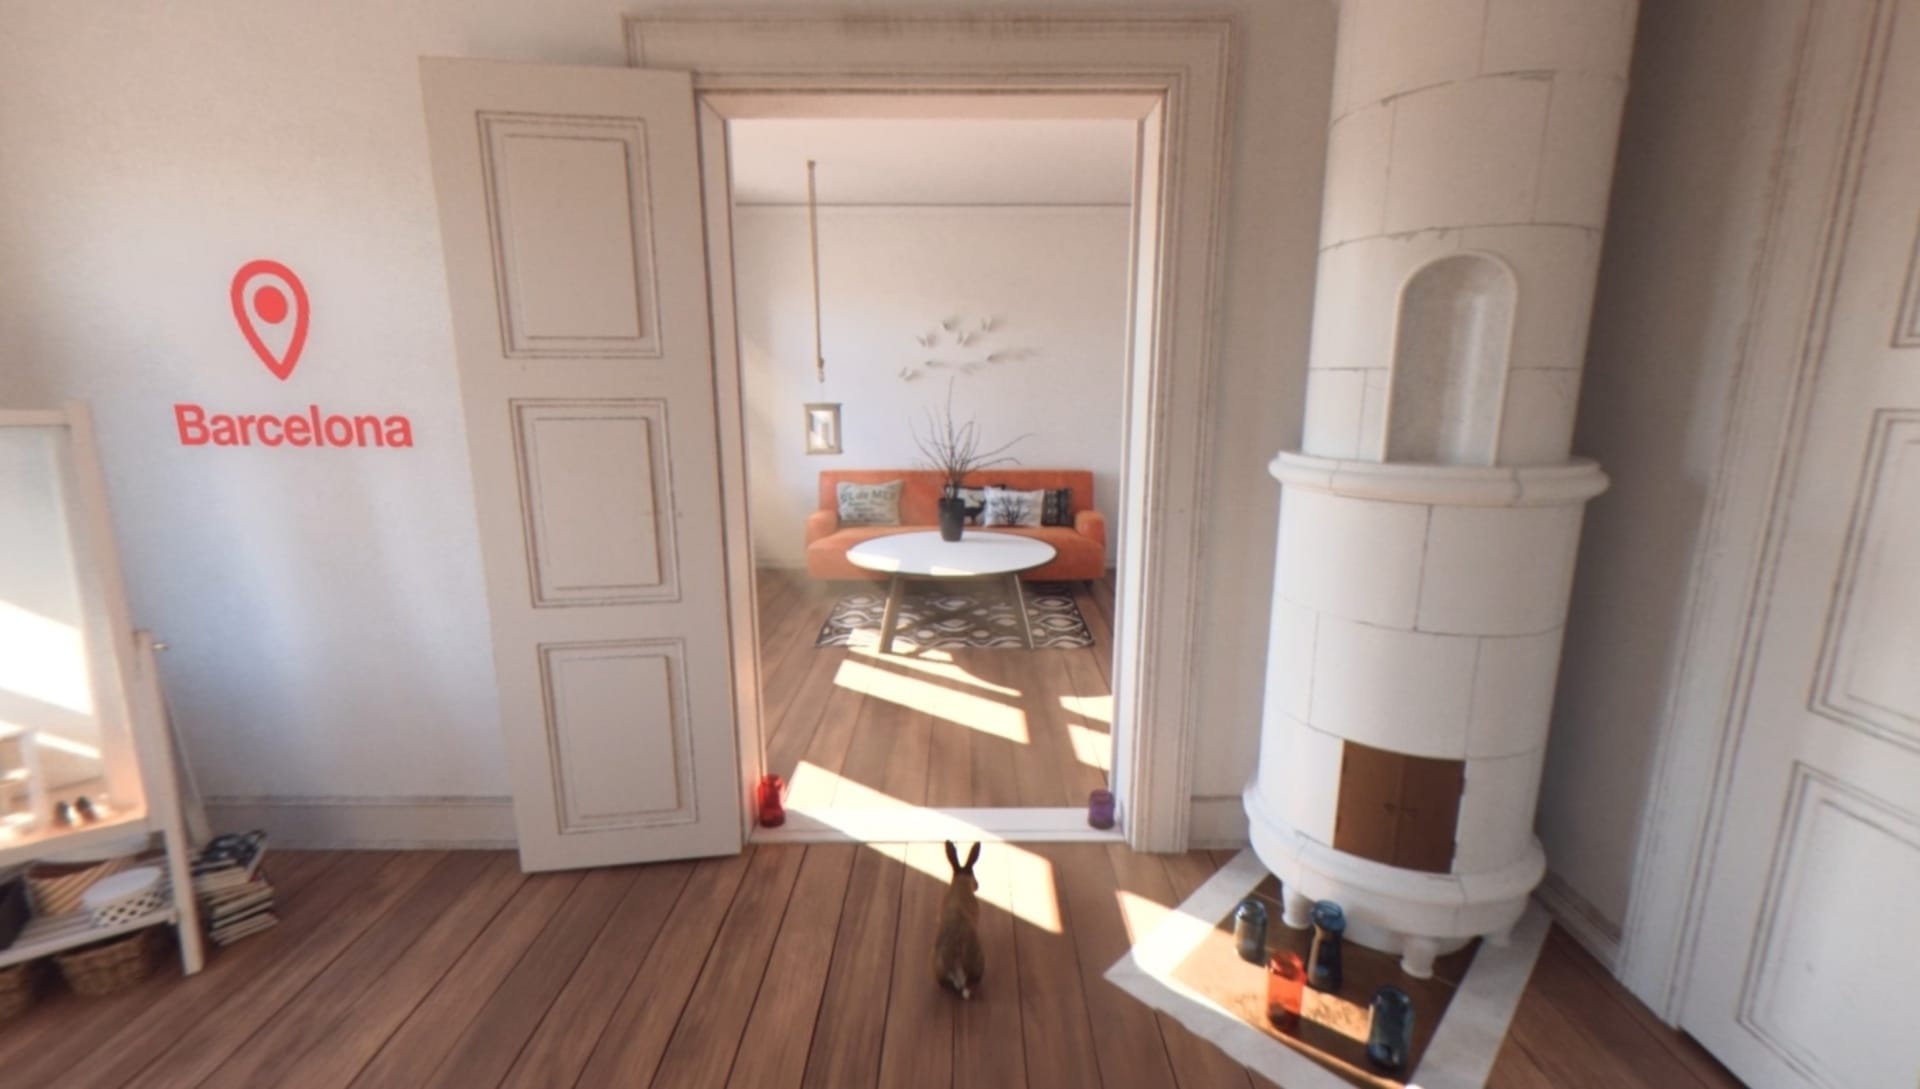 Follow the Rabbit into an Airbnb VR Experience by Bipolar Studio | Chaos